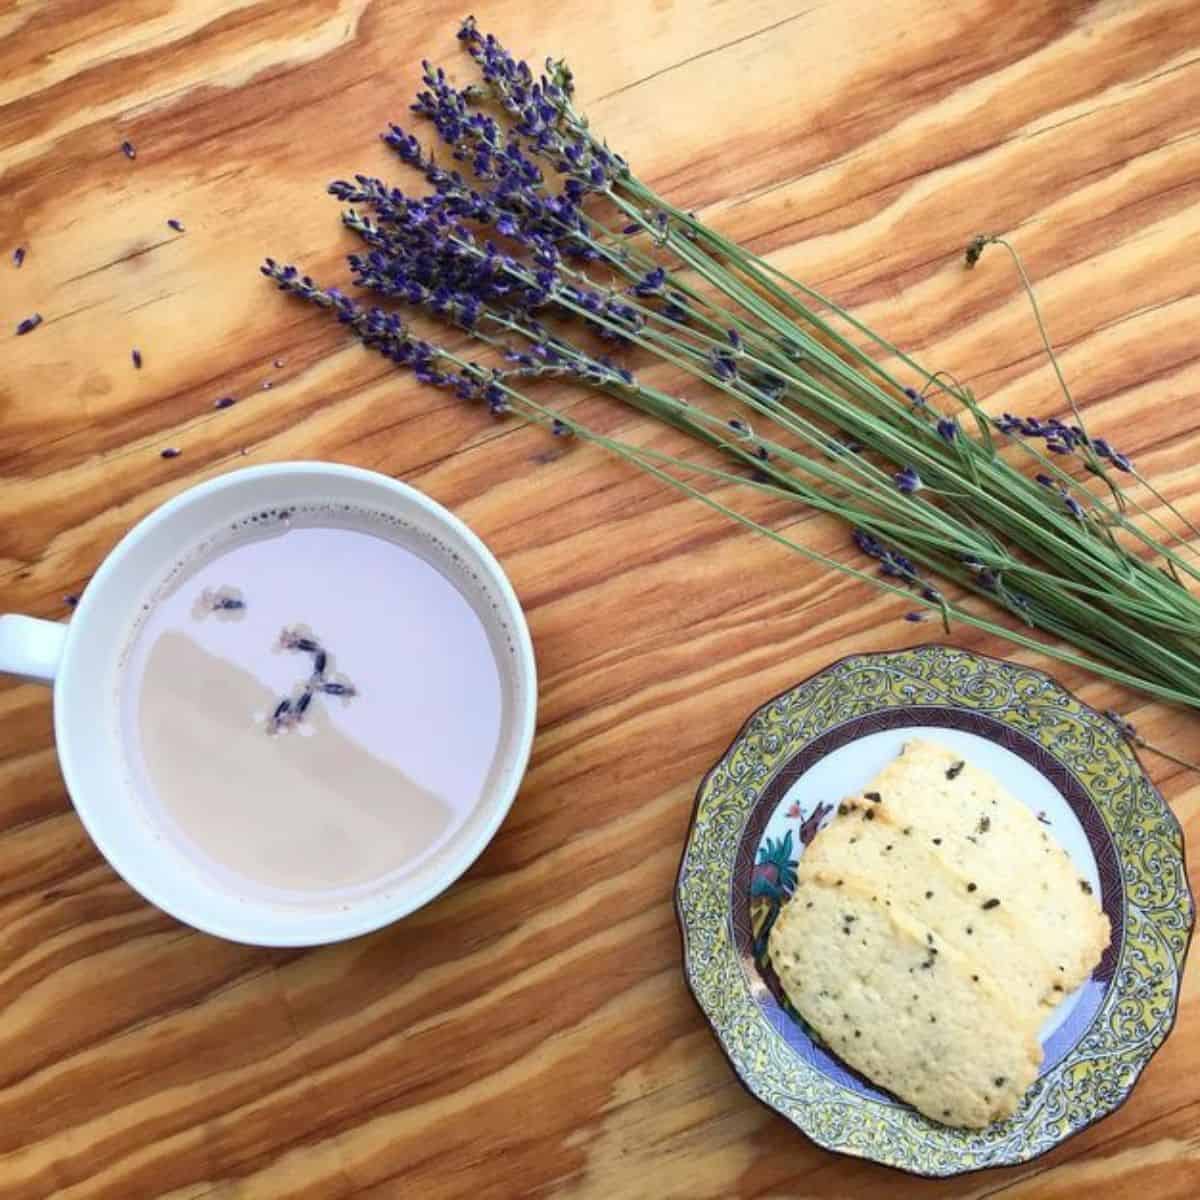 Fresh lavenders, golden brown cookies, and a hot cup of lavender drink